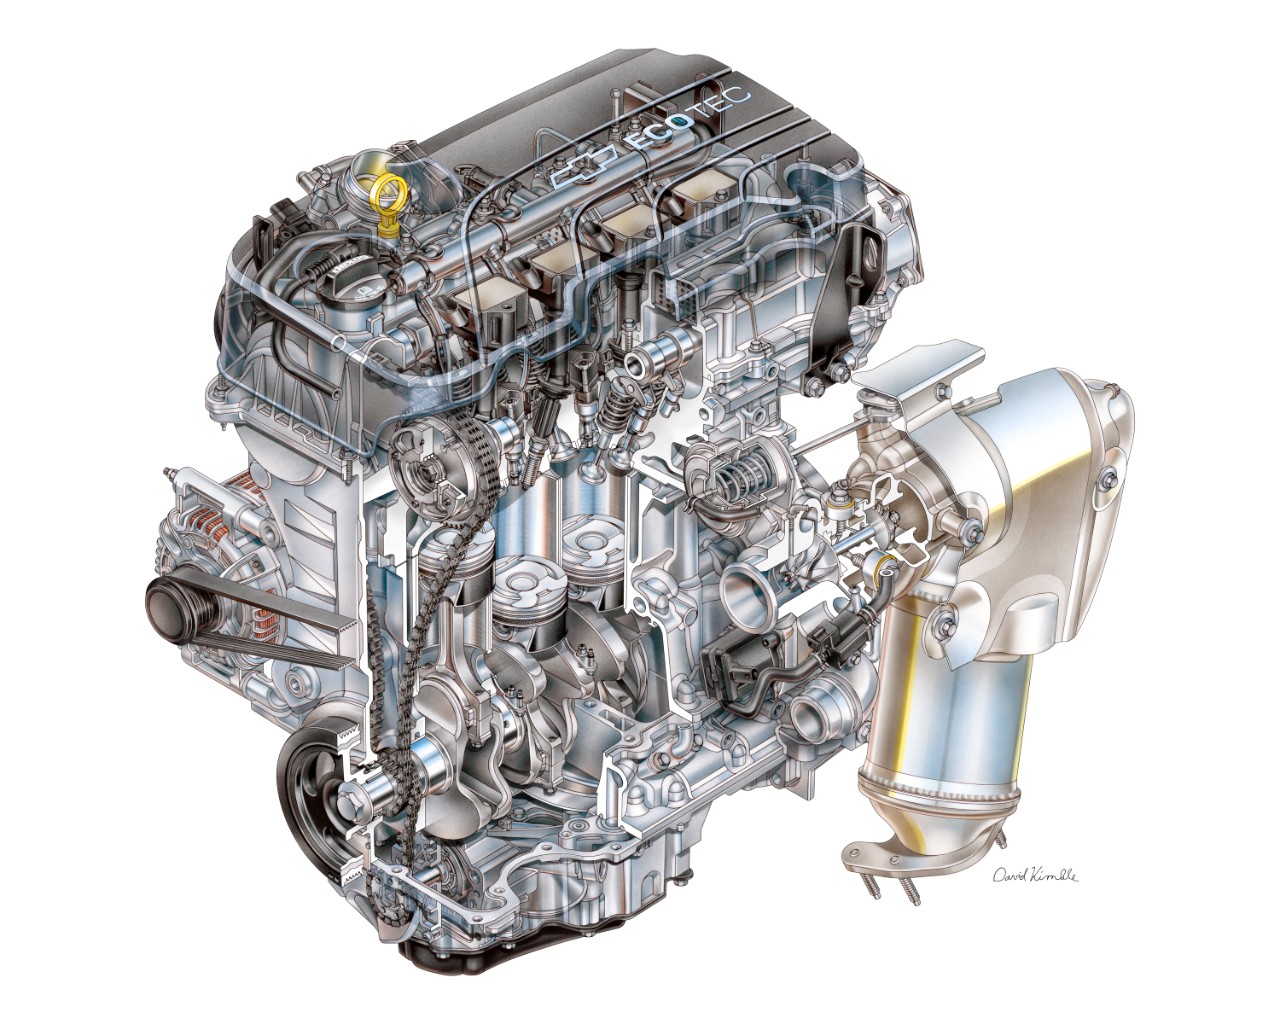 New Family of Ecotec Engines Coming to 2016 Chevy Cruze ... chevy transmission diagrams 